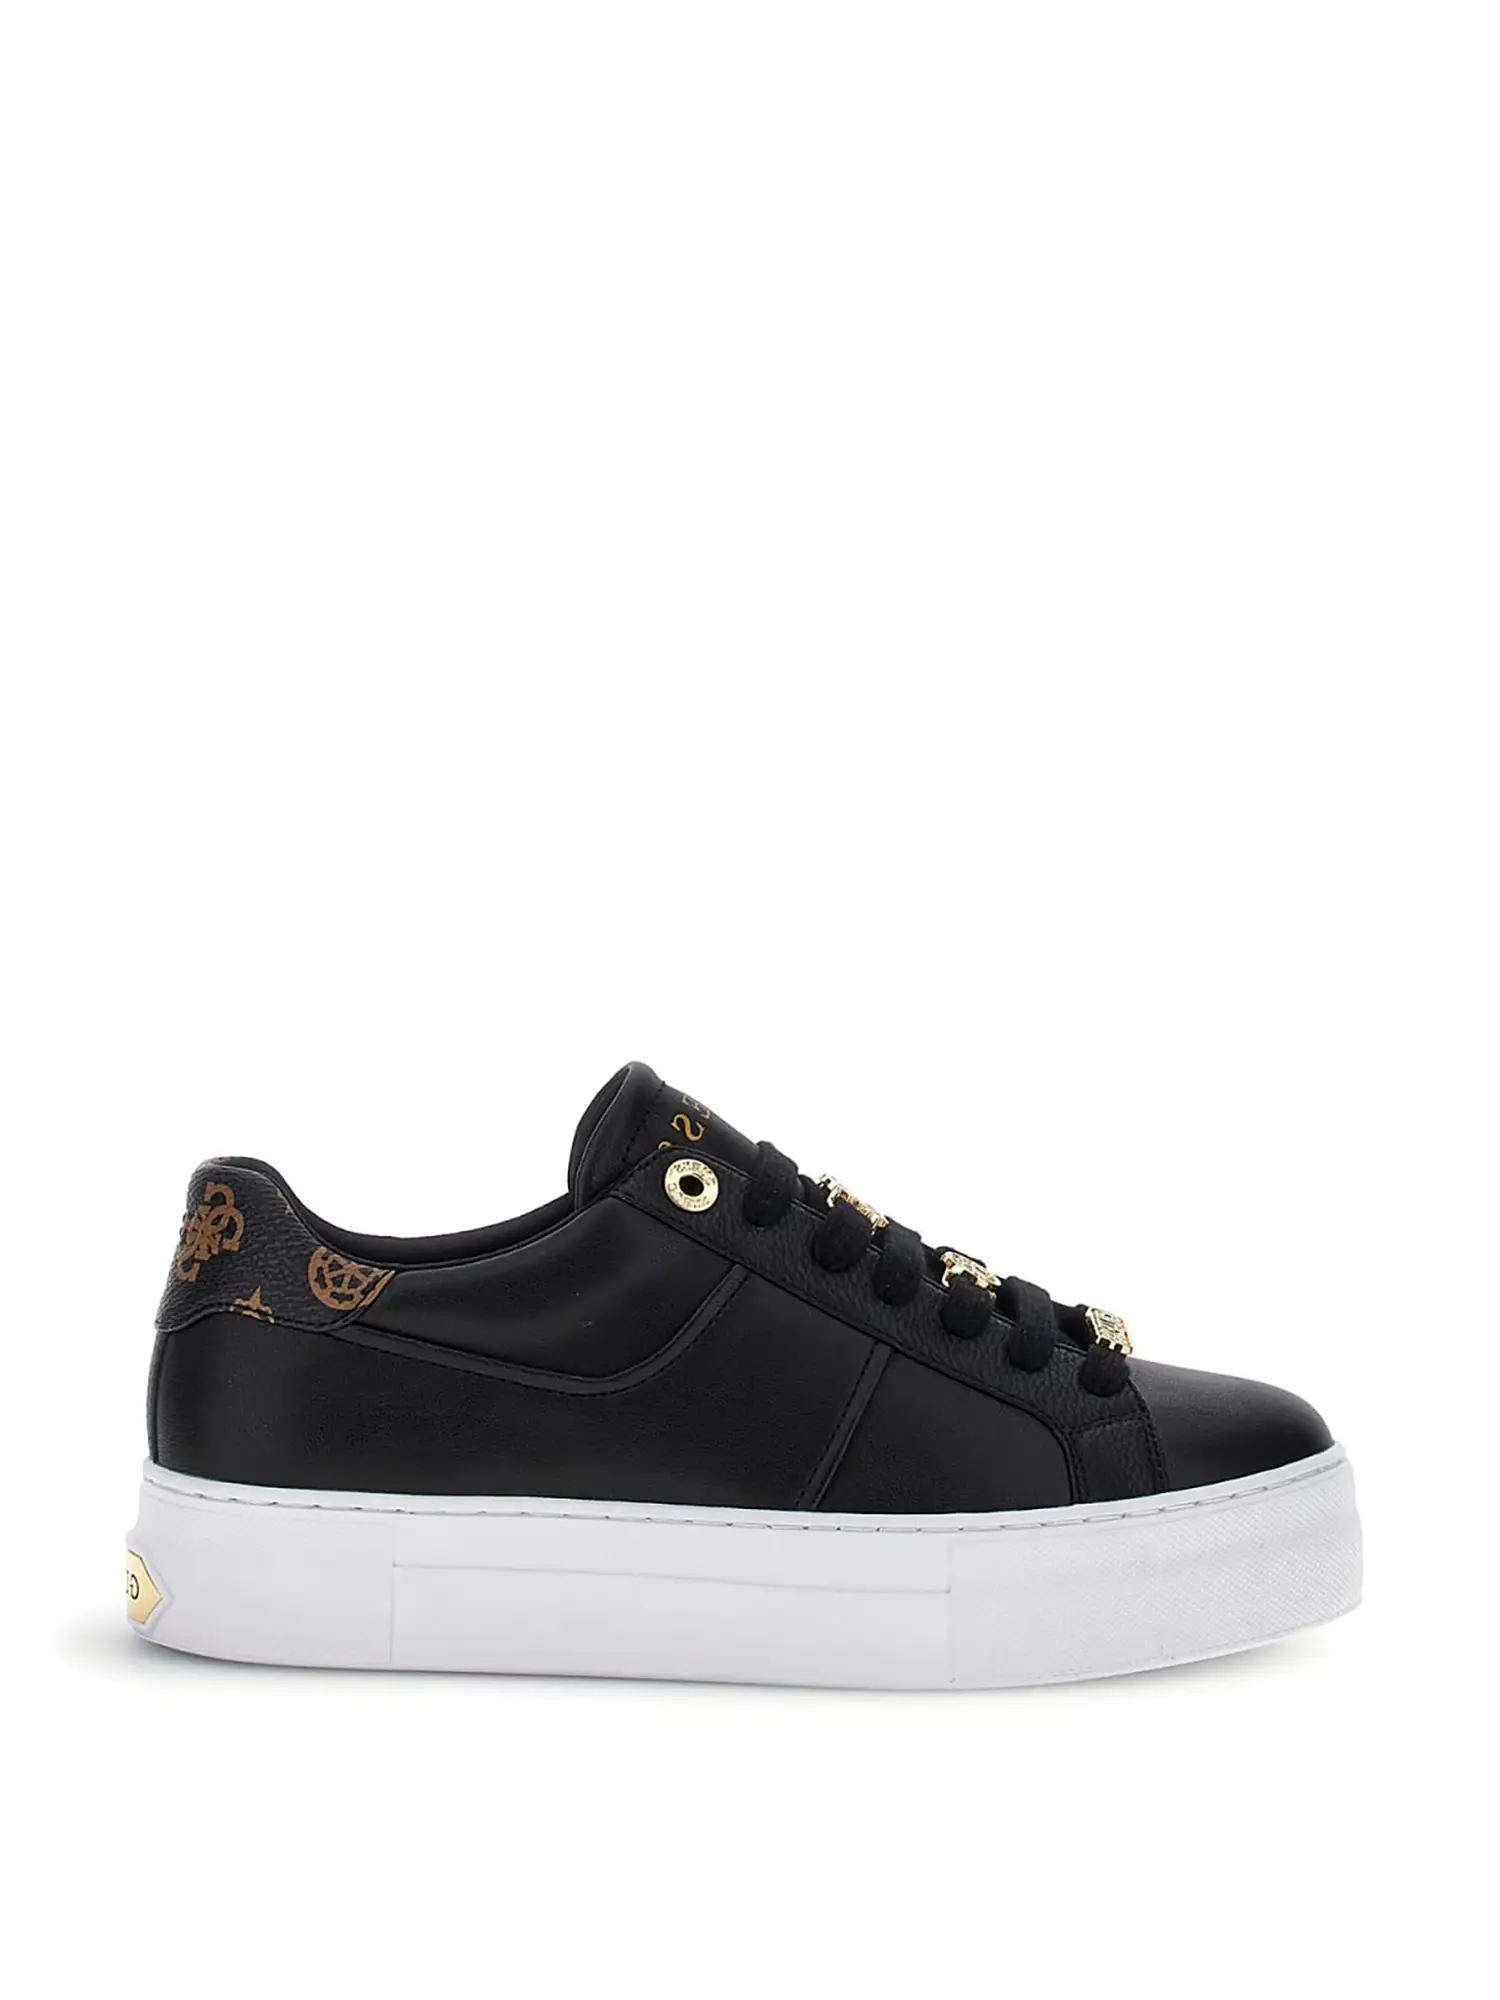 SNEAKERS DONNA - GUESS - FLJGIE ELE12 - NERO, 36